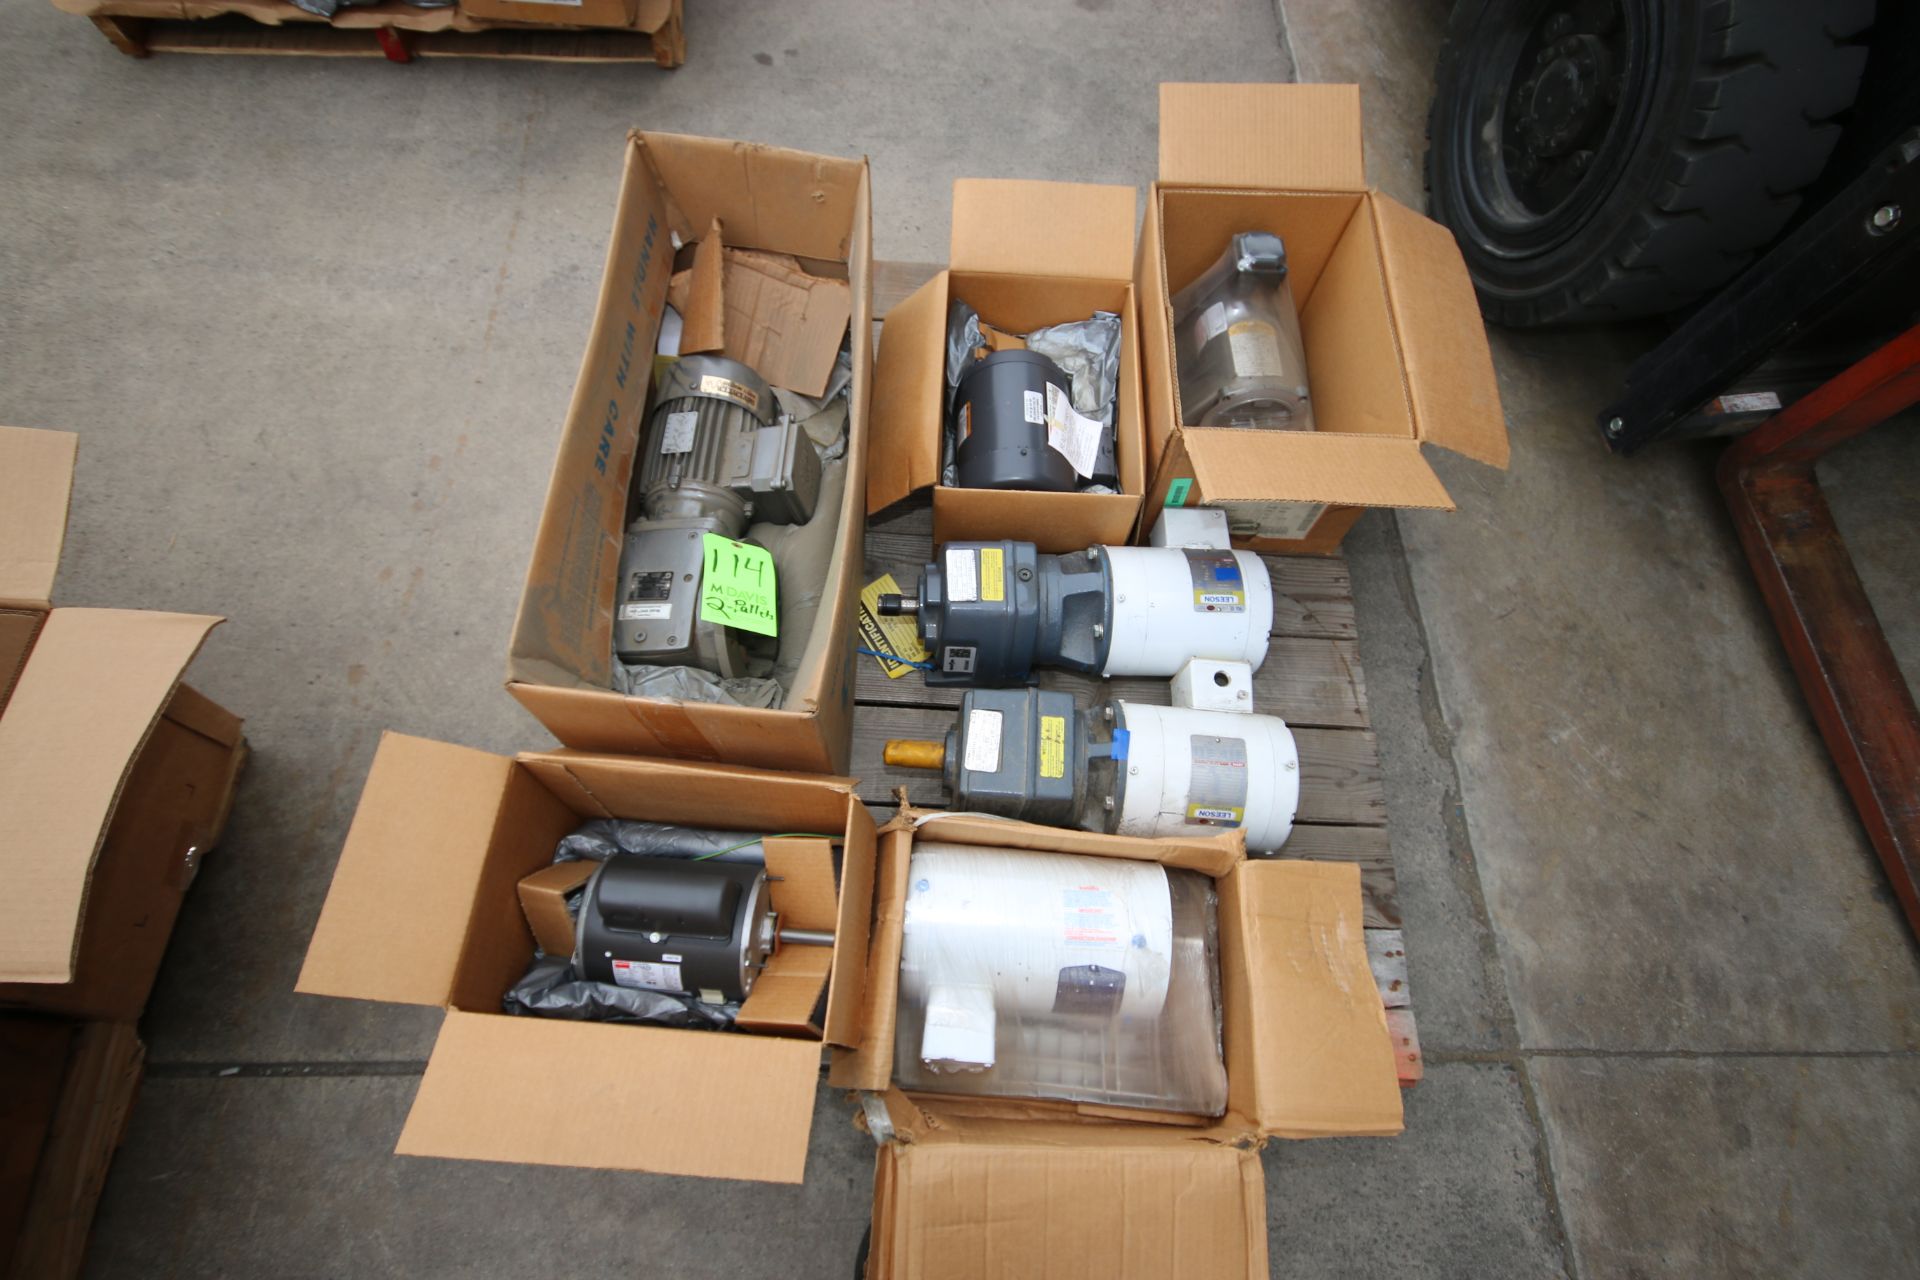 2-Pallets of NEW Motors and Drives, Includes Aprox. (15) NEW In Box Drives/Motors , hp Range from